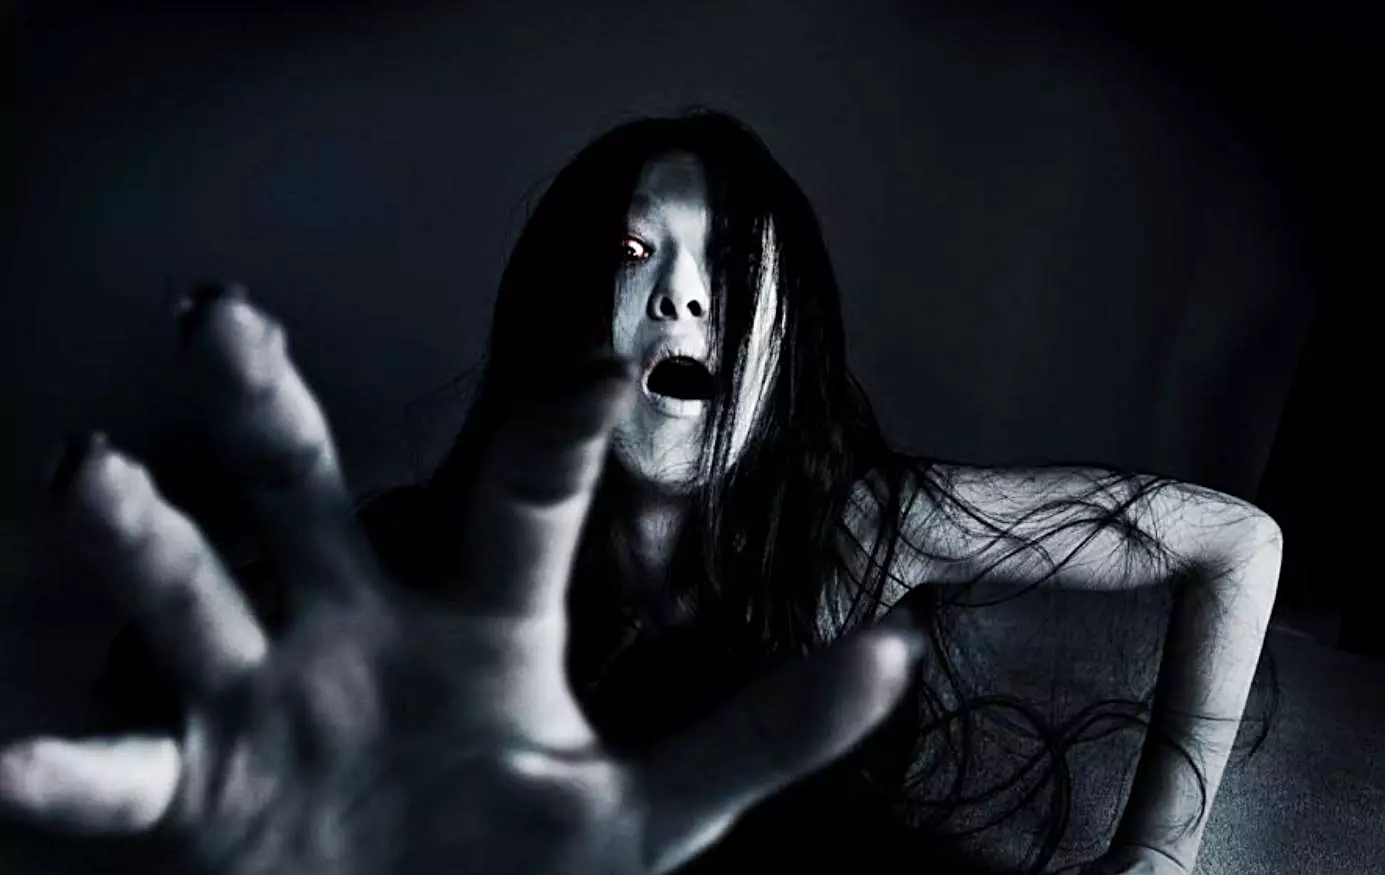 The newest full trailer for The Grudge reboot has been released (